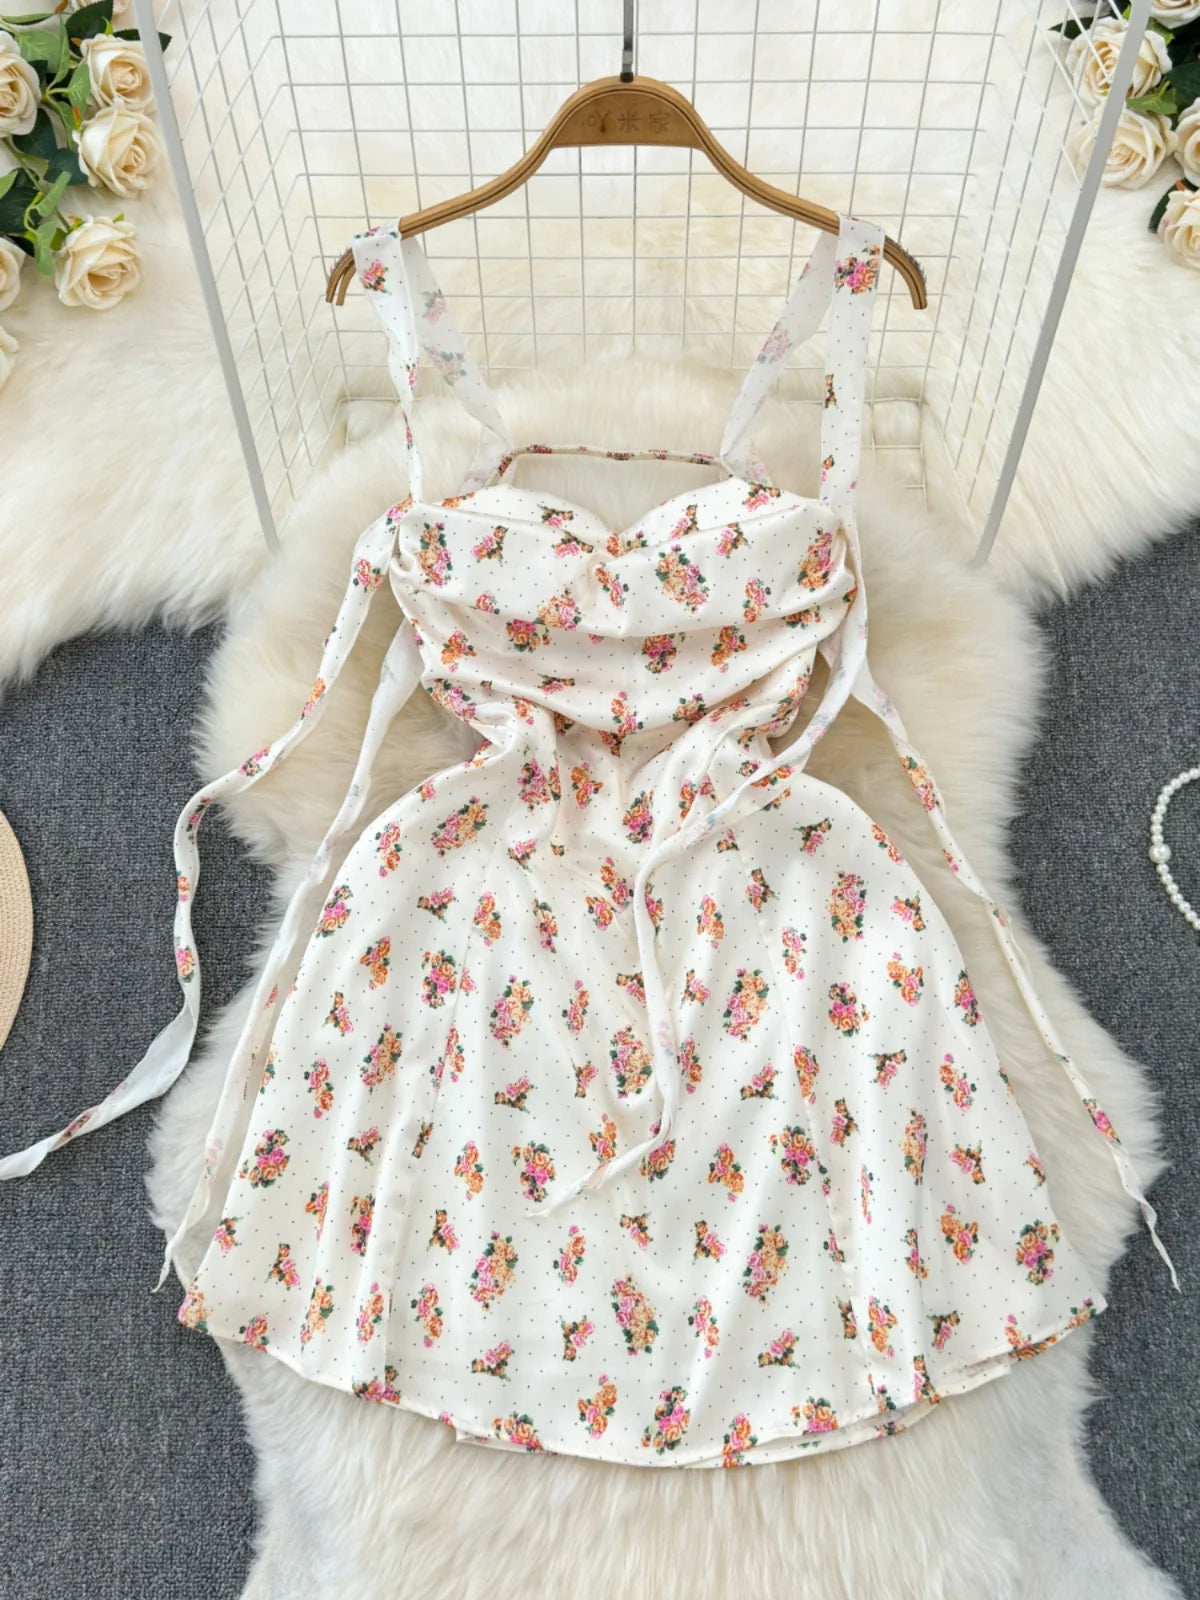 Floral Print Sweetheart Neckline Summer Dress With Tie